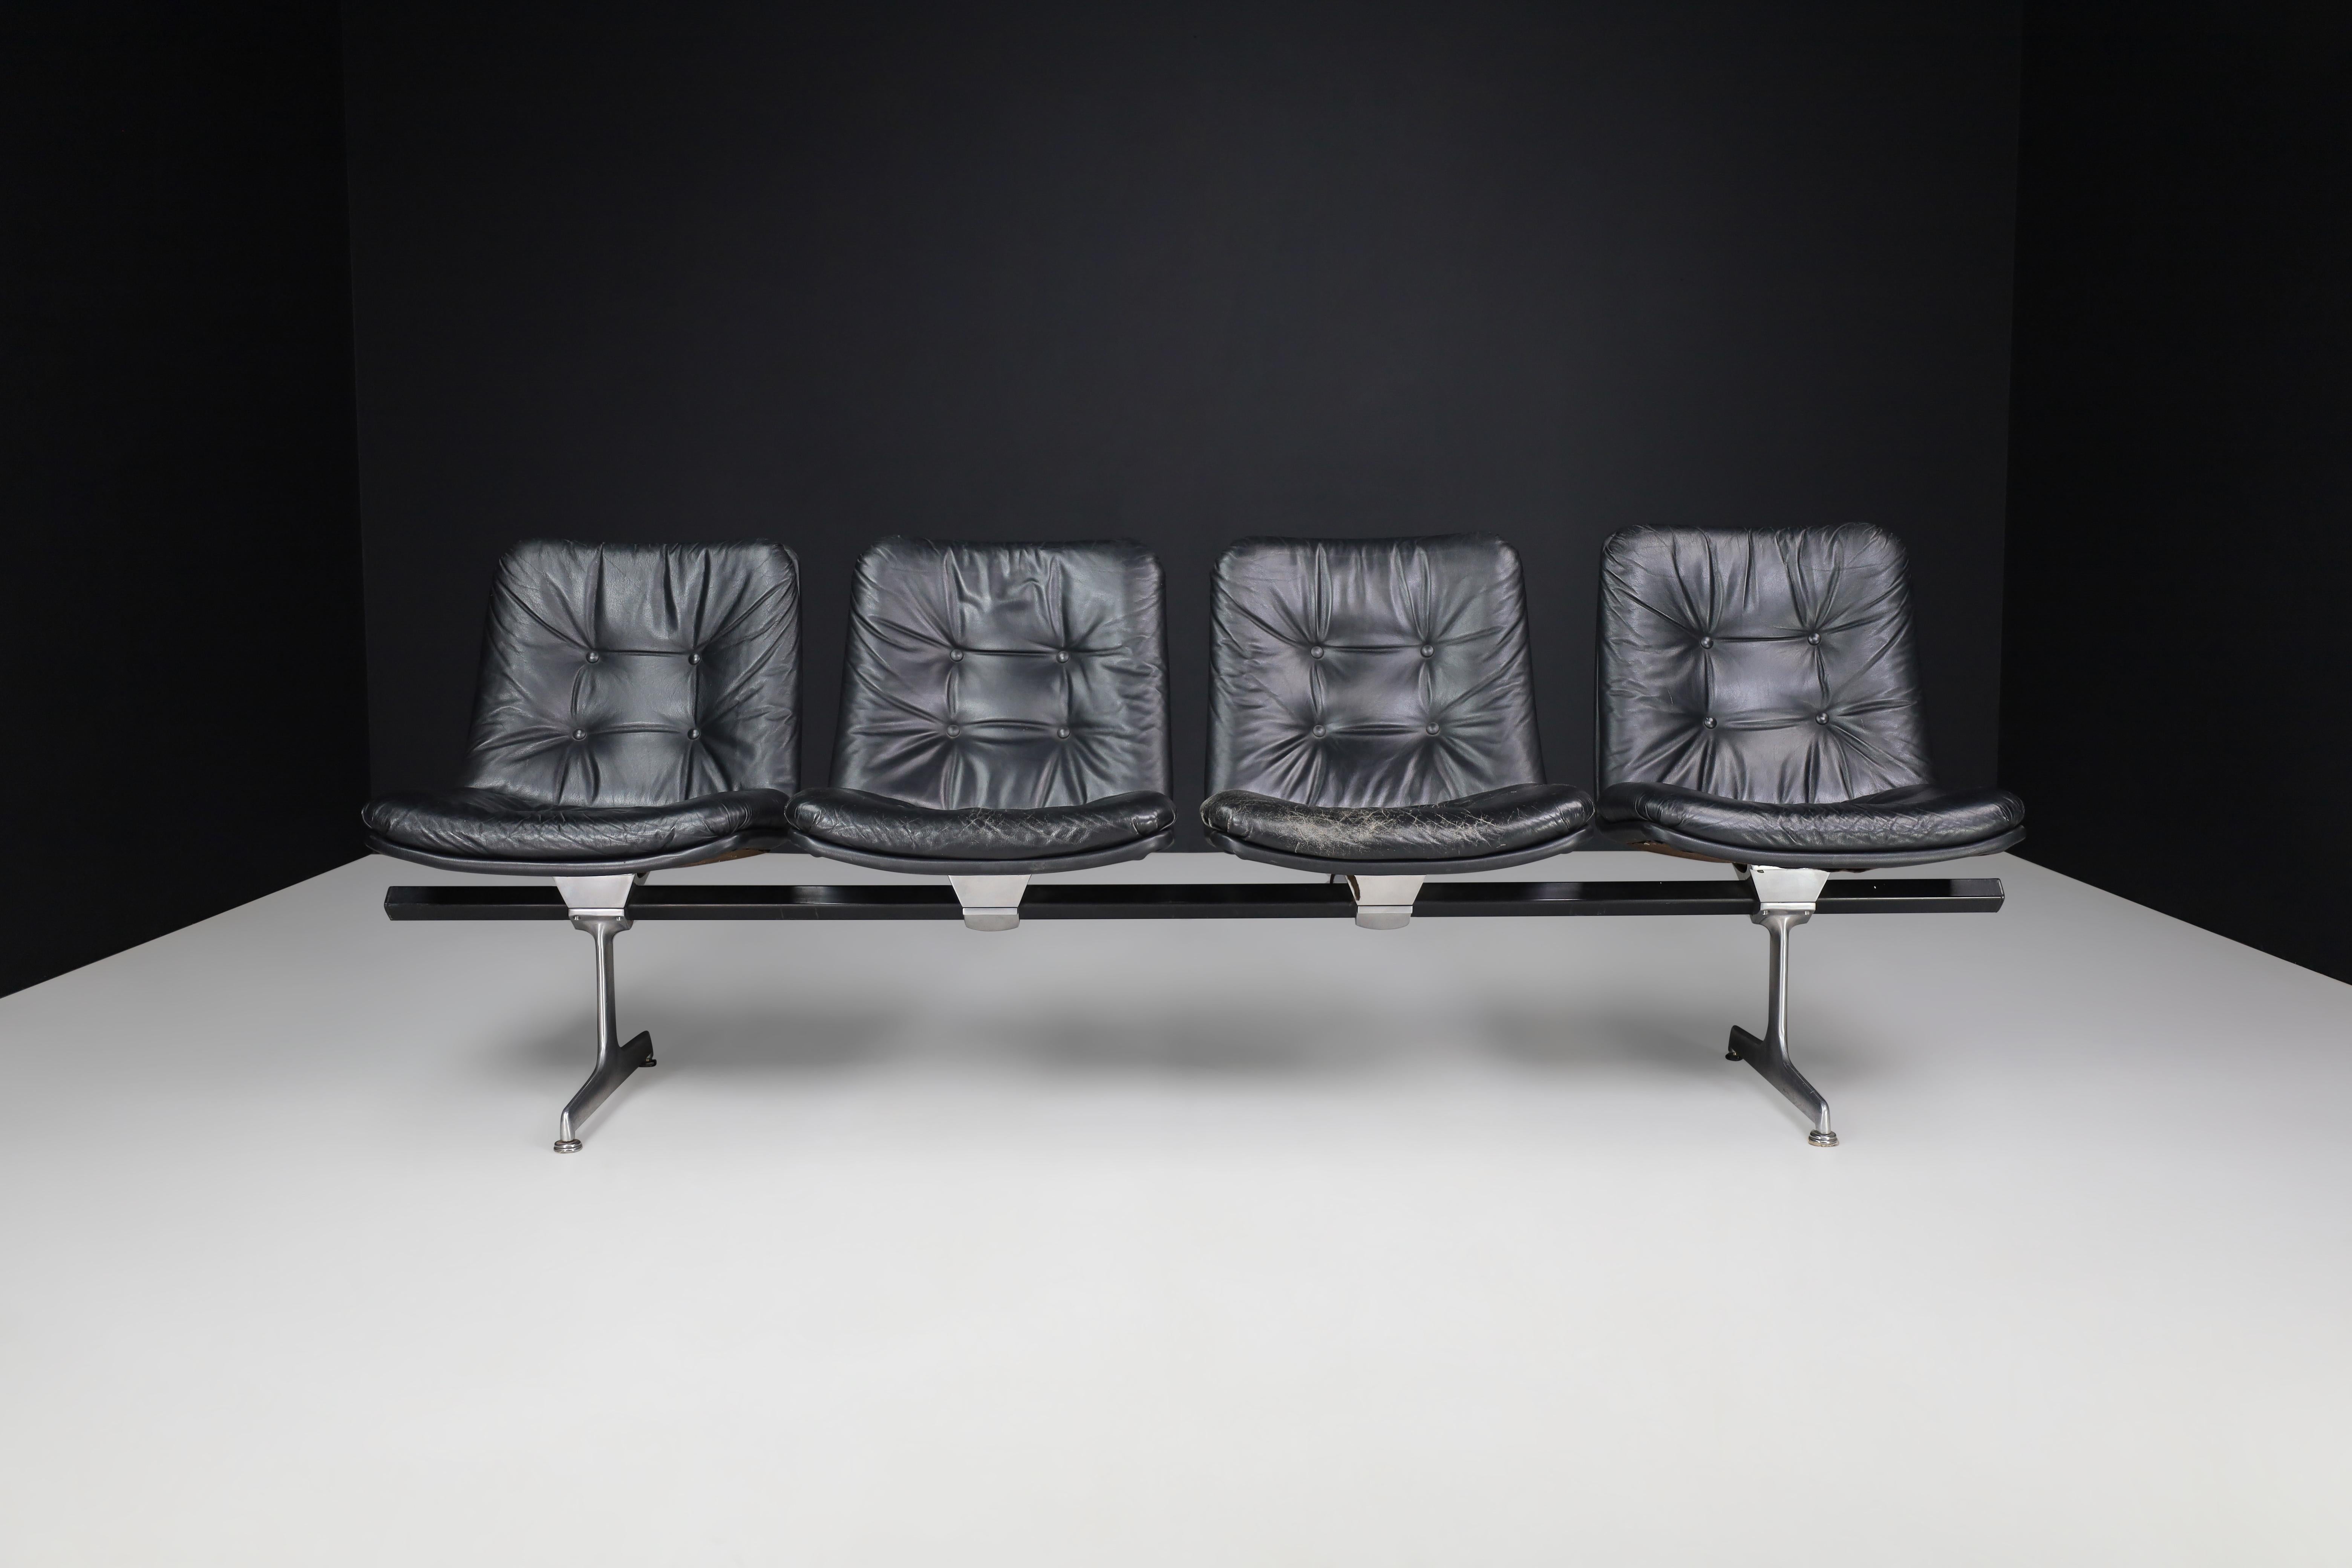 Geoffrey Harcourt Leather Bench for Artifort, The Netherlands 1960s

This midcentury four-seat bench, designed by Geoffrey D. Harcourt for Artifort in the 1960s, would be a great addition to any office or waiting area. The modular seating system